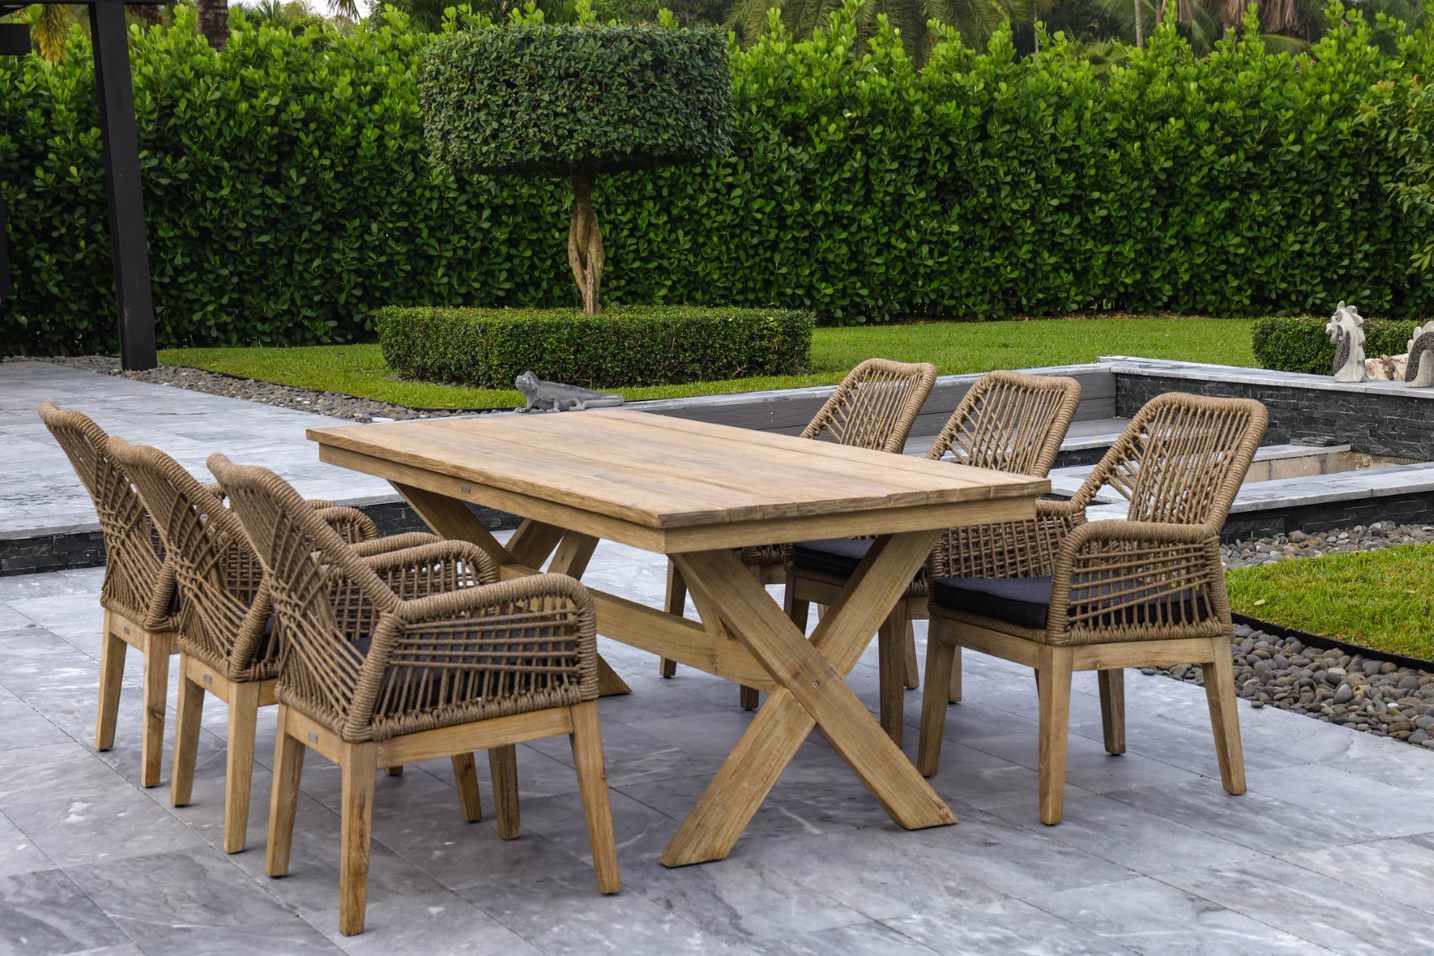 OUTSY 0ASAN-W12-GR-R SANTINO 7-PIECE OUTDOOR DINING SET - WOOD TABLE WITH 6 WOOD, ALUMINUM, AND ROPE CHAIRS